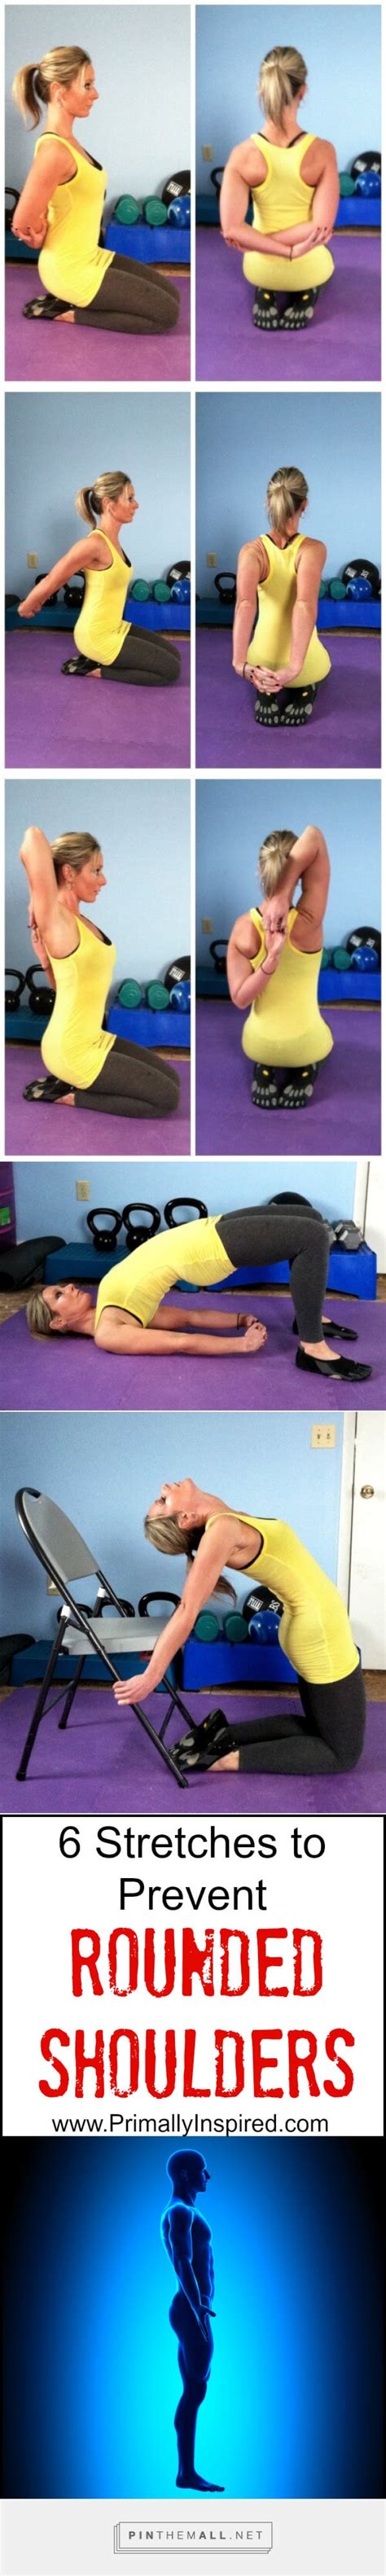 6 Stretches To Prevent Rounded Shoulders Primally Inspired A